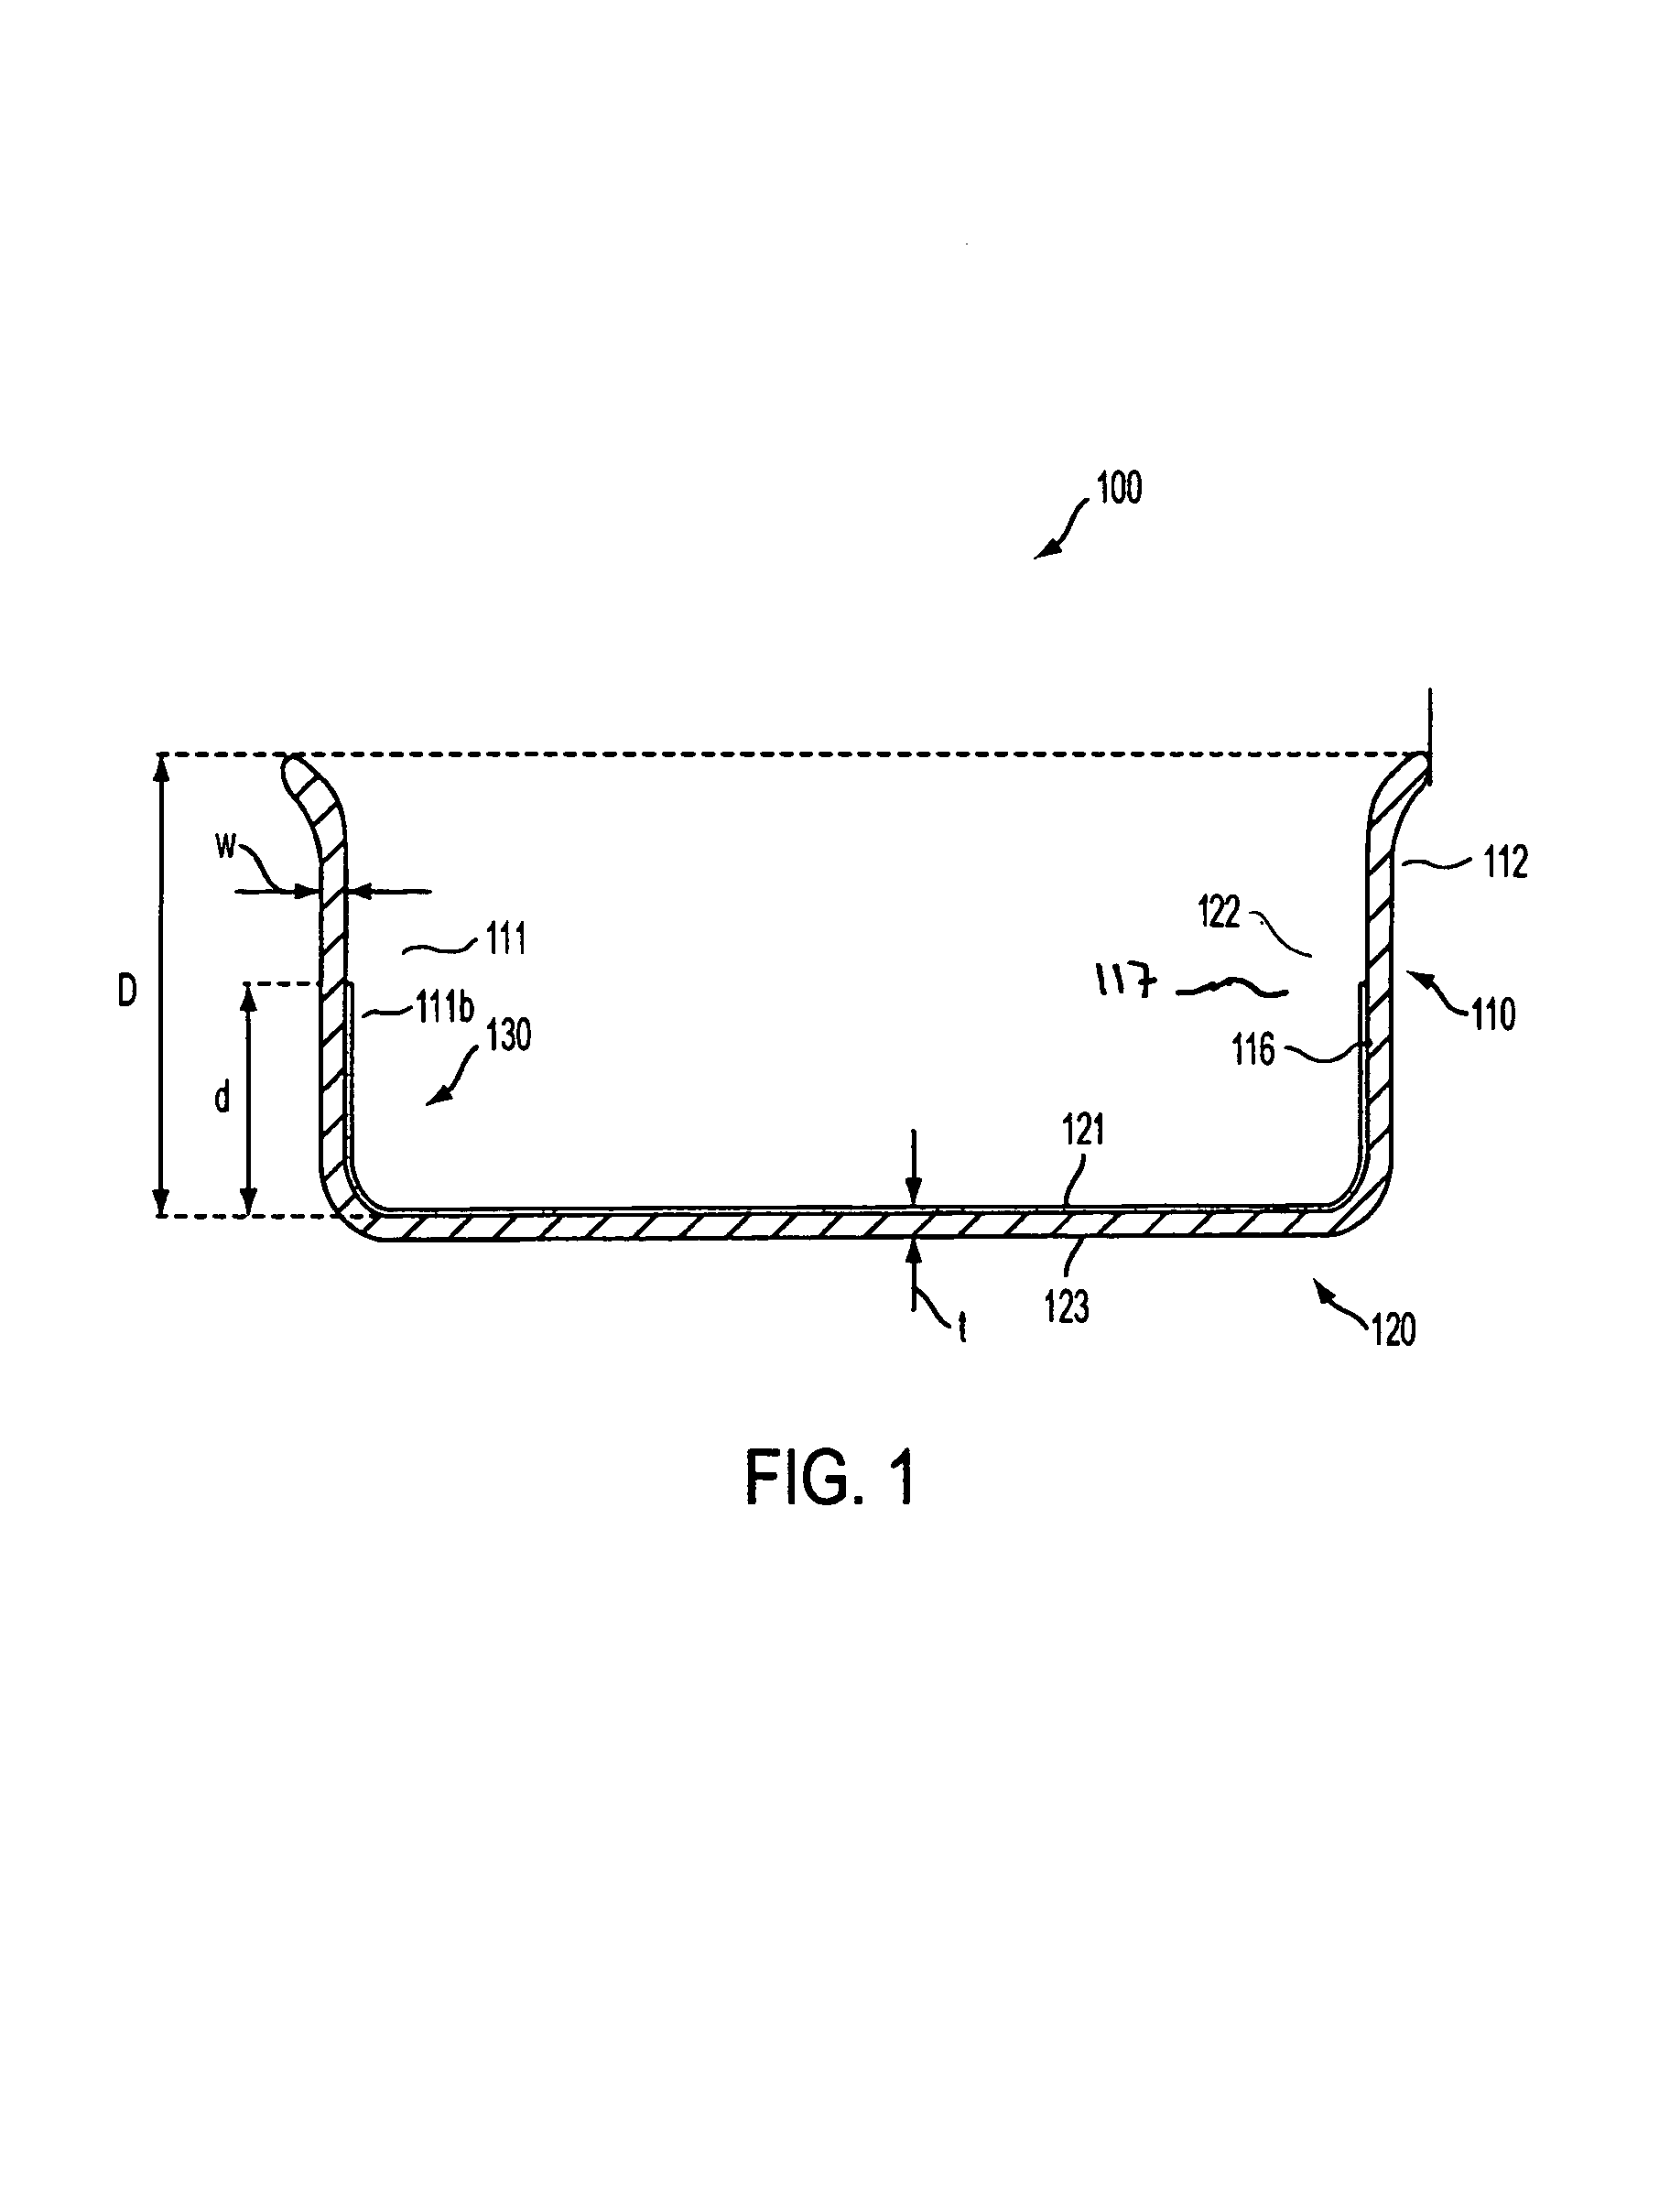 Method of fabricating titanium lined composite cookware